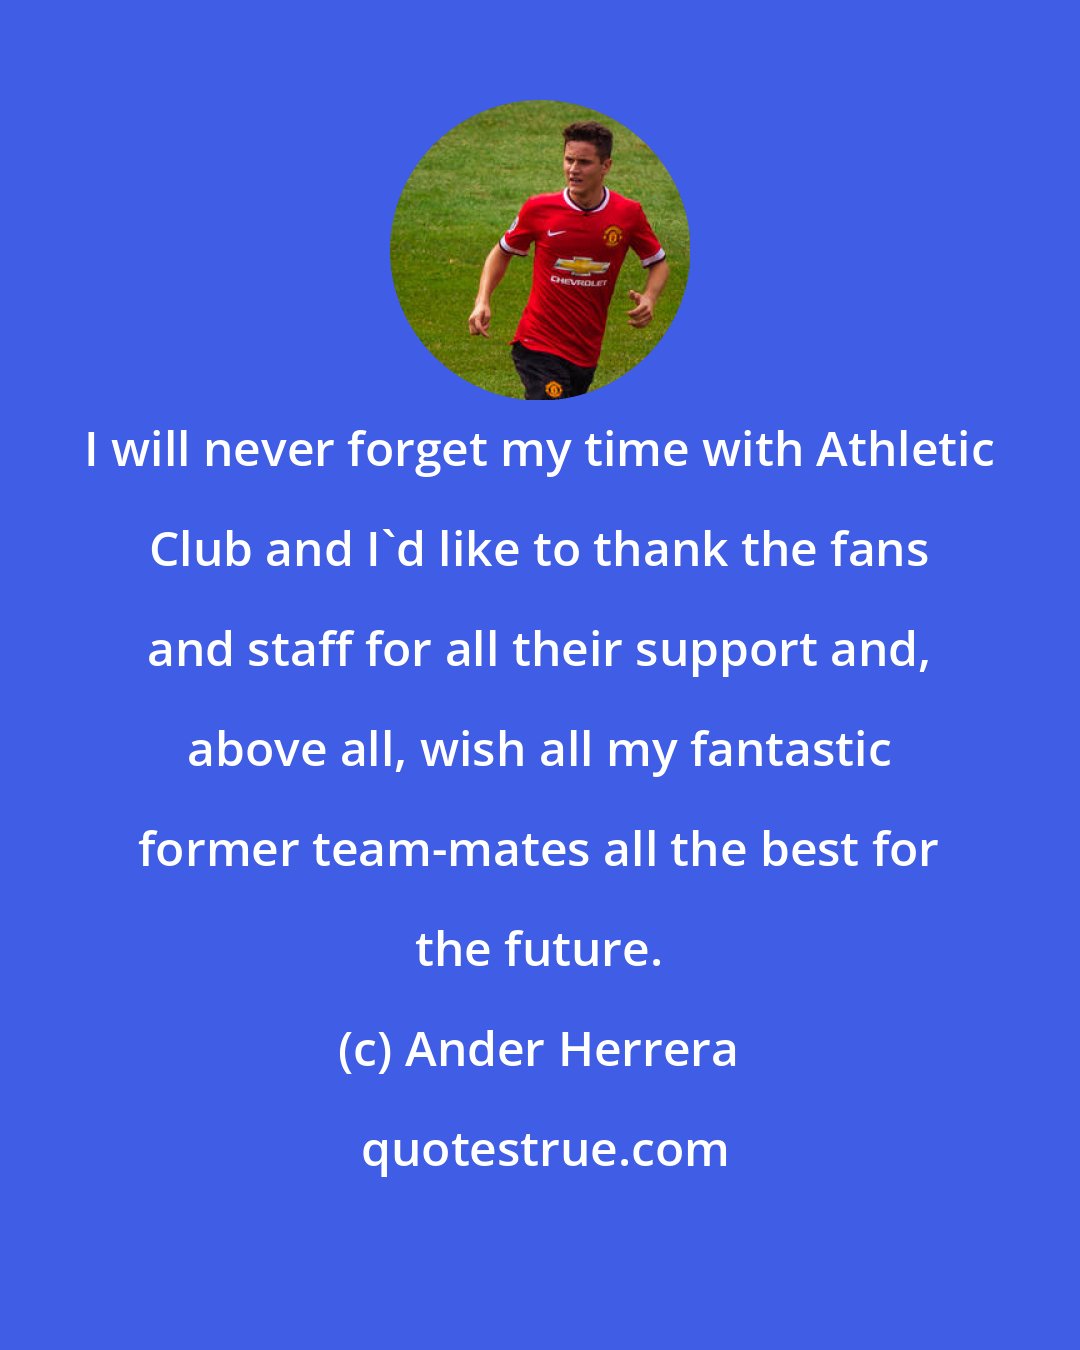 Ander Herrera: I will never forget my time with Athletic Club and I'd like to thank the fans and staff for all their support and, above all, wish all my fantastic former team-mates all the best for the future.